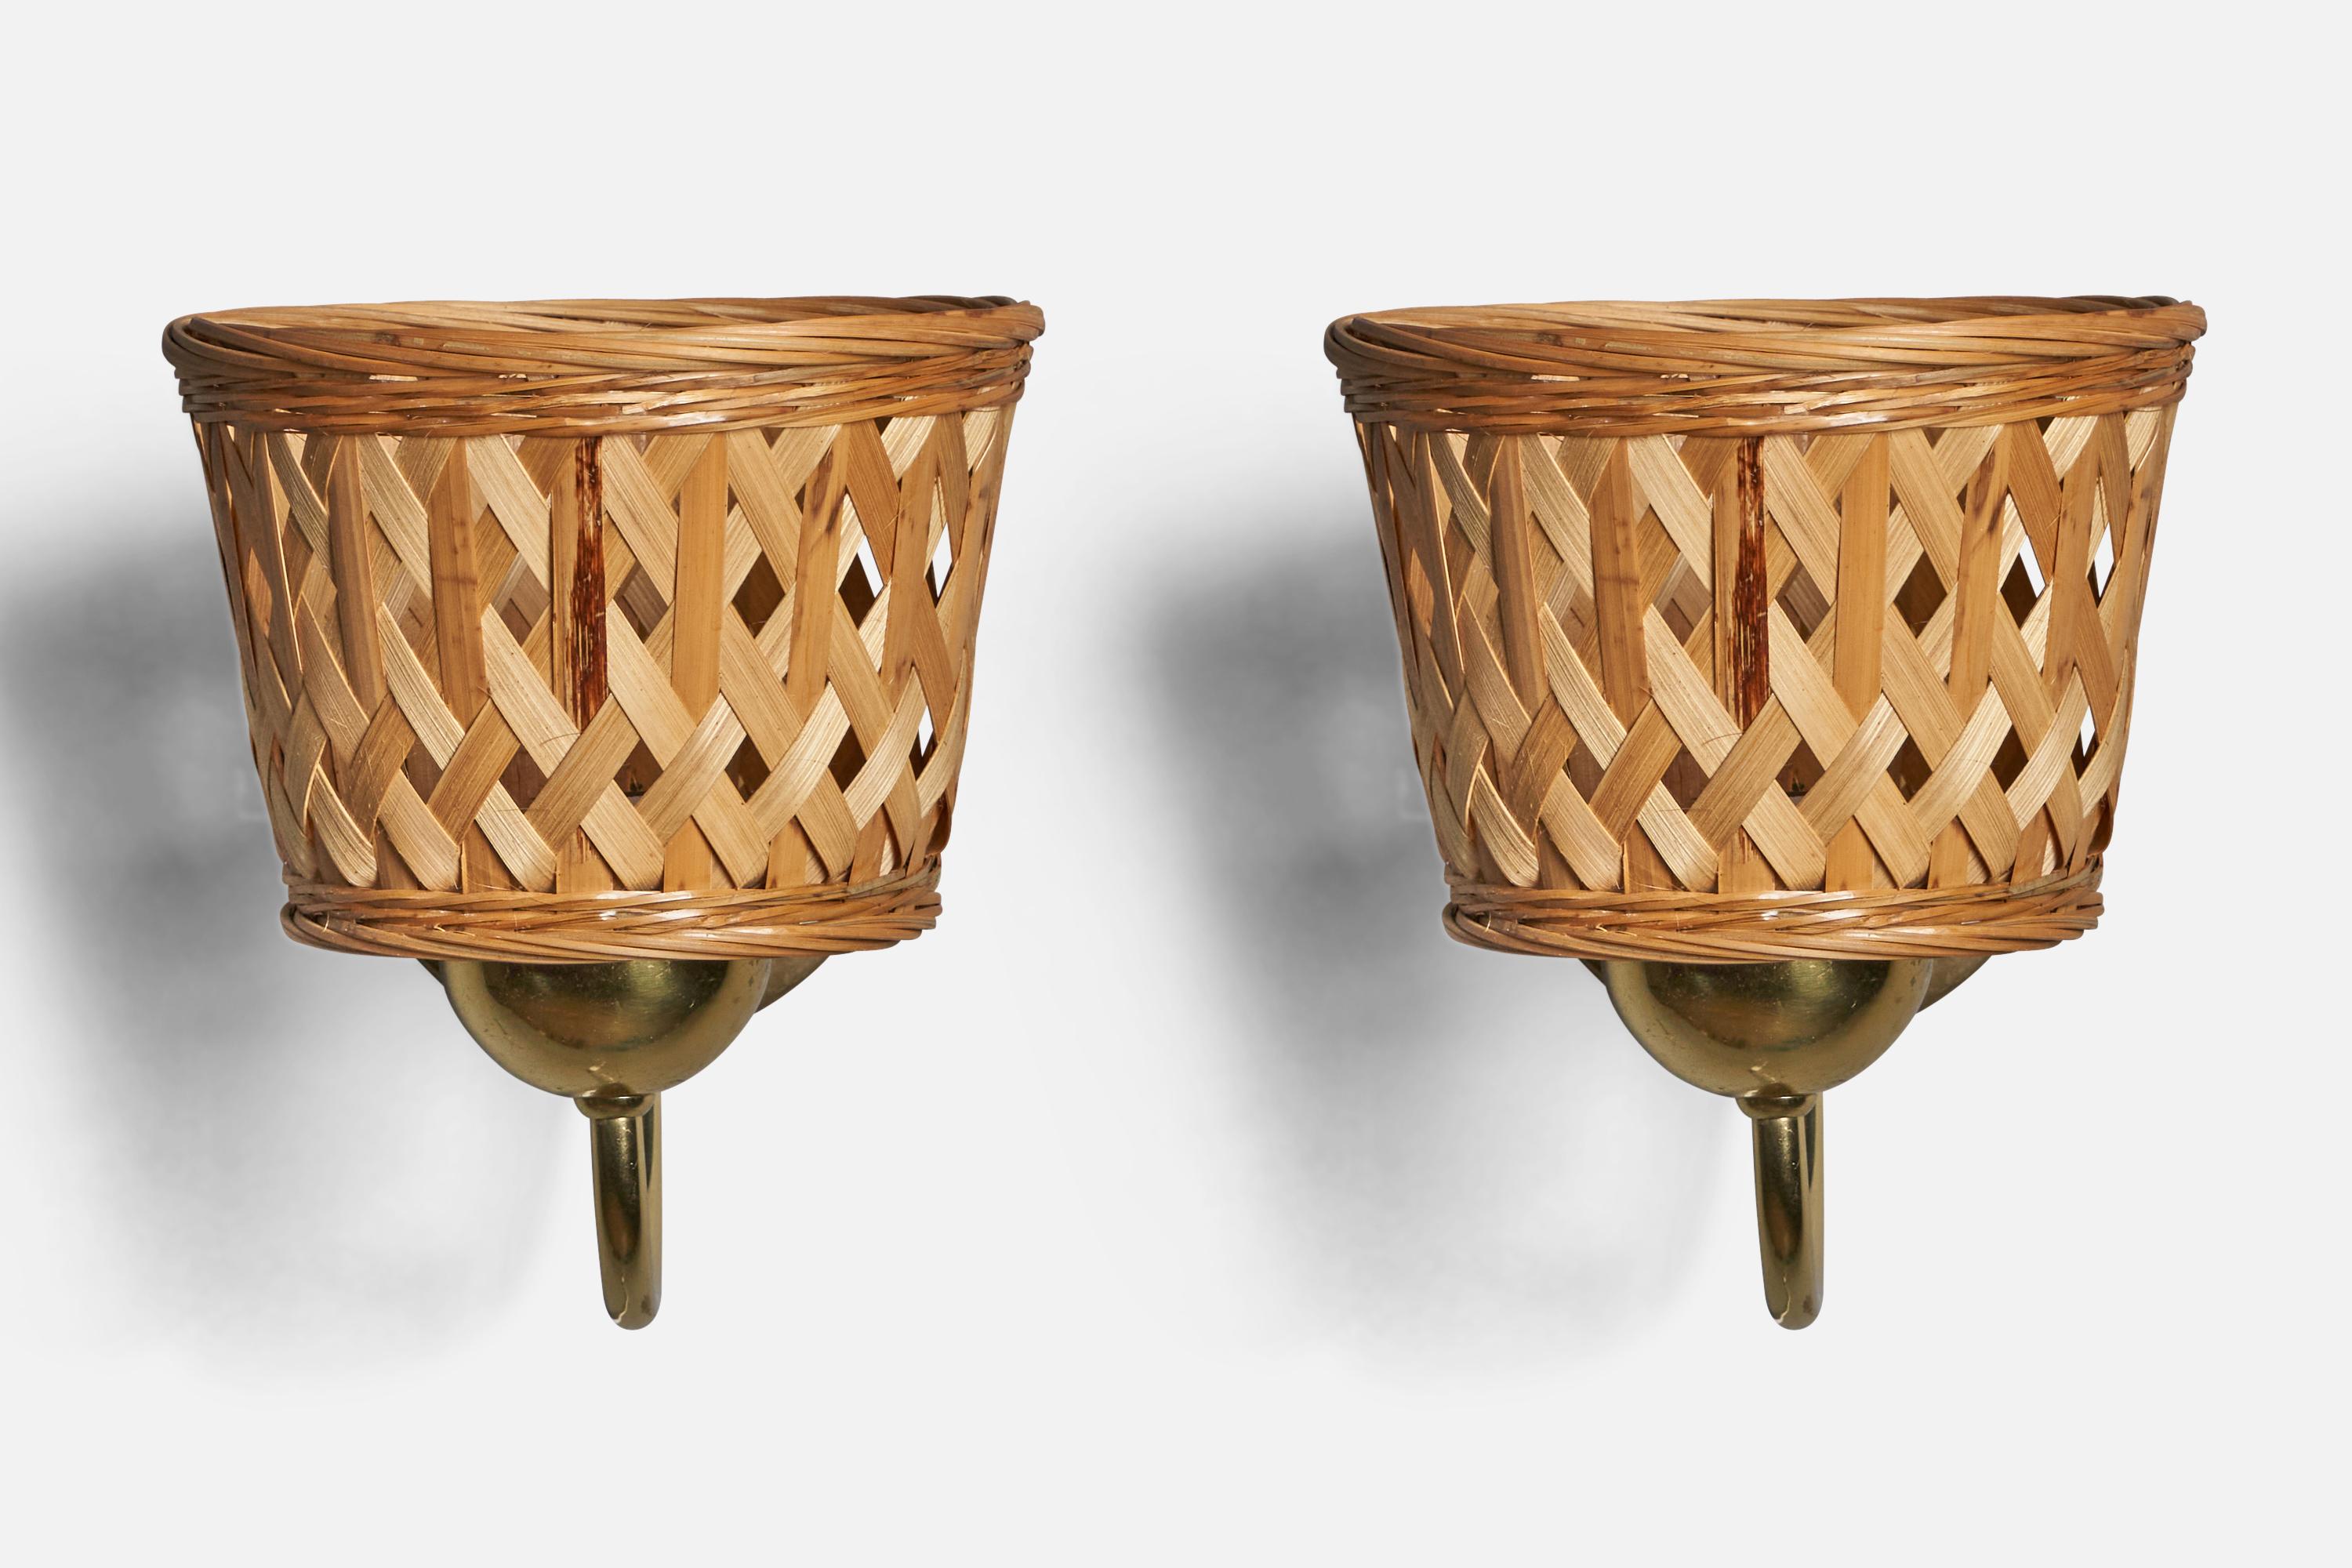 A pair of brass and rattan wall lights, designed and produced by EWÅ Värnamo, Sweden, c. 1970s.

Overall Dimensions: 7.25